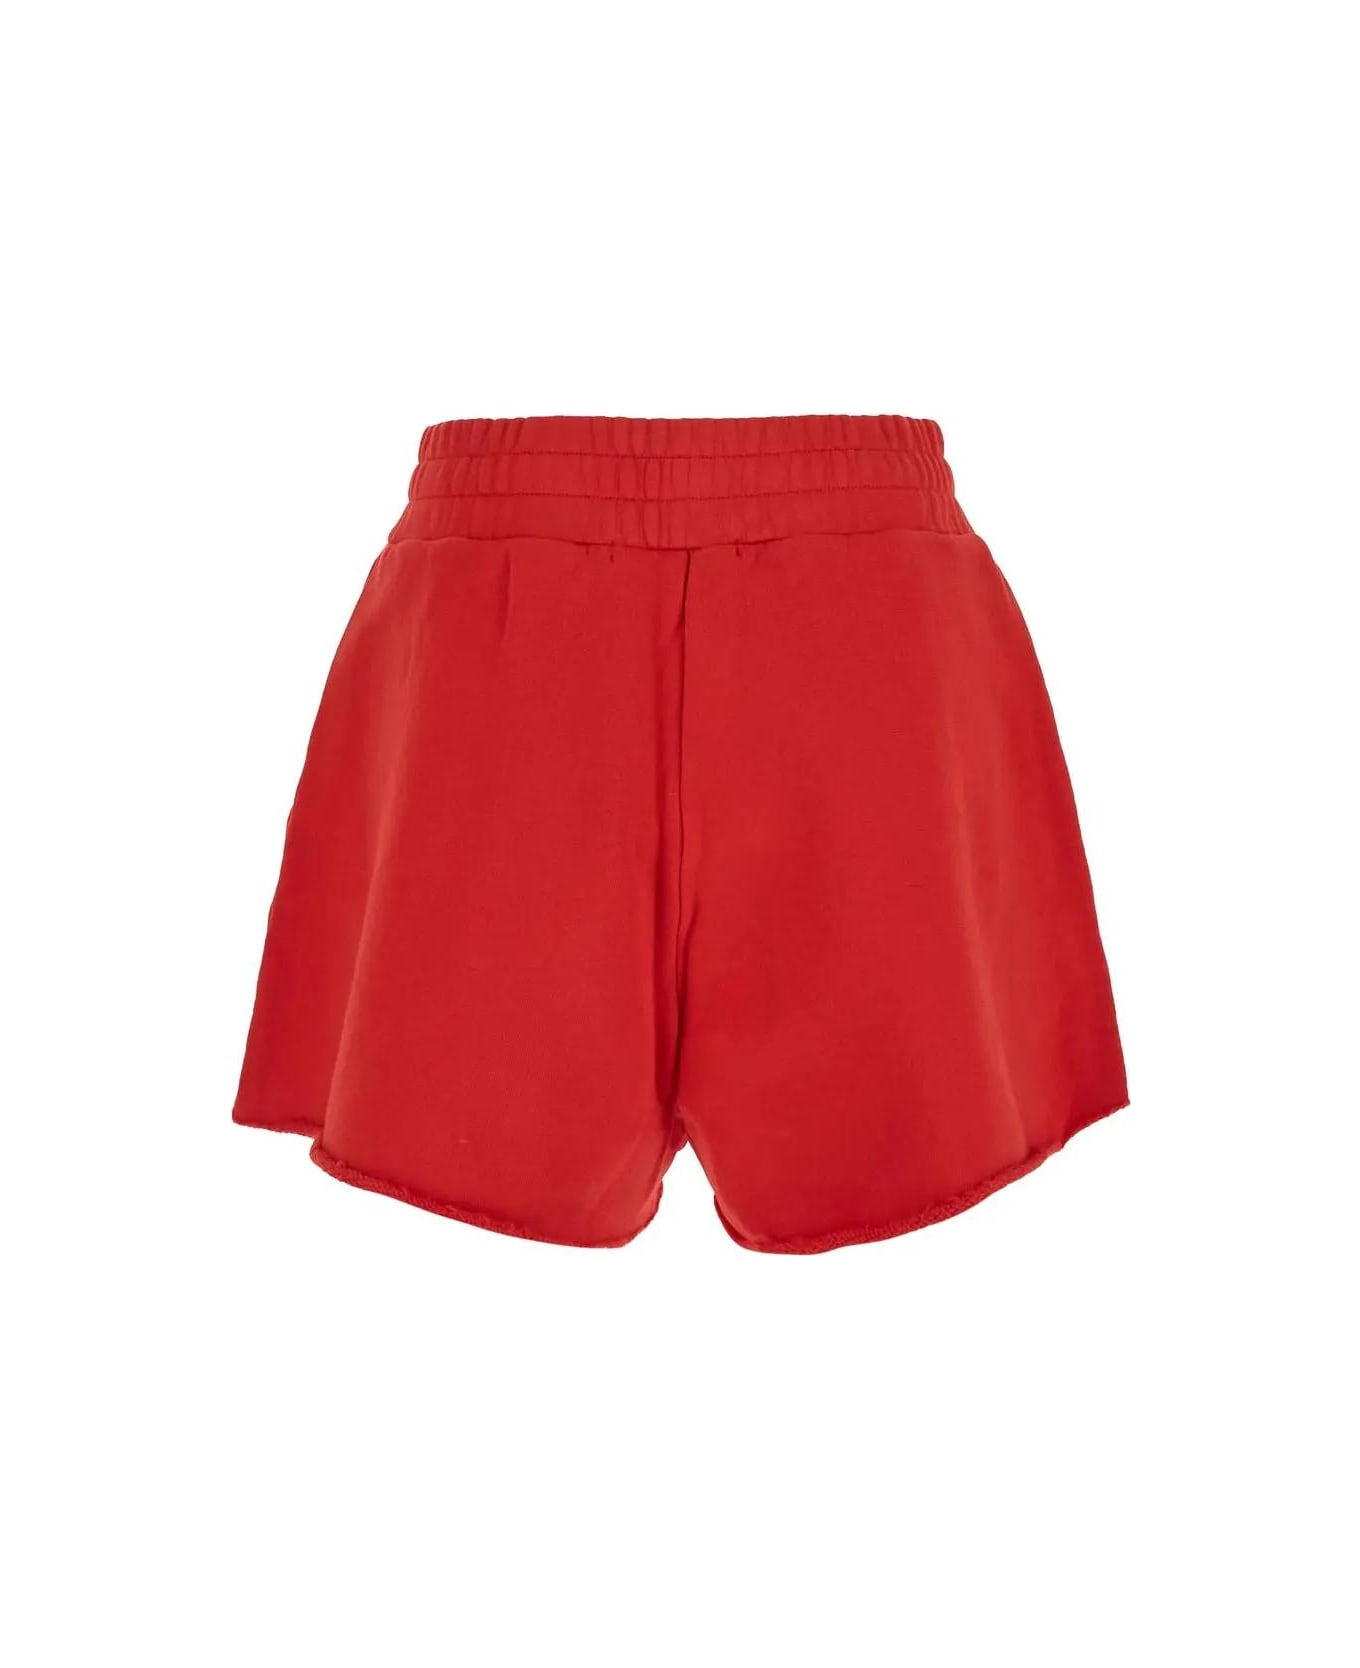 Autry Red Short Pants - APPAREL RED